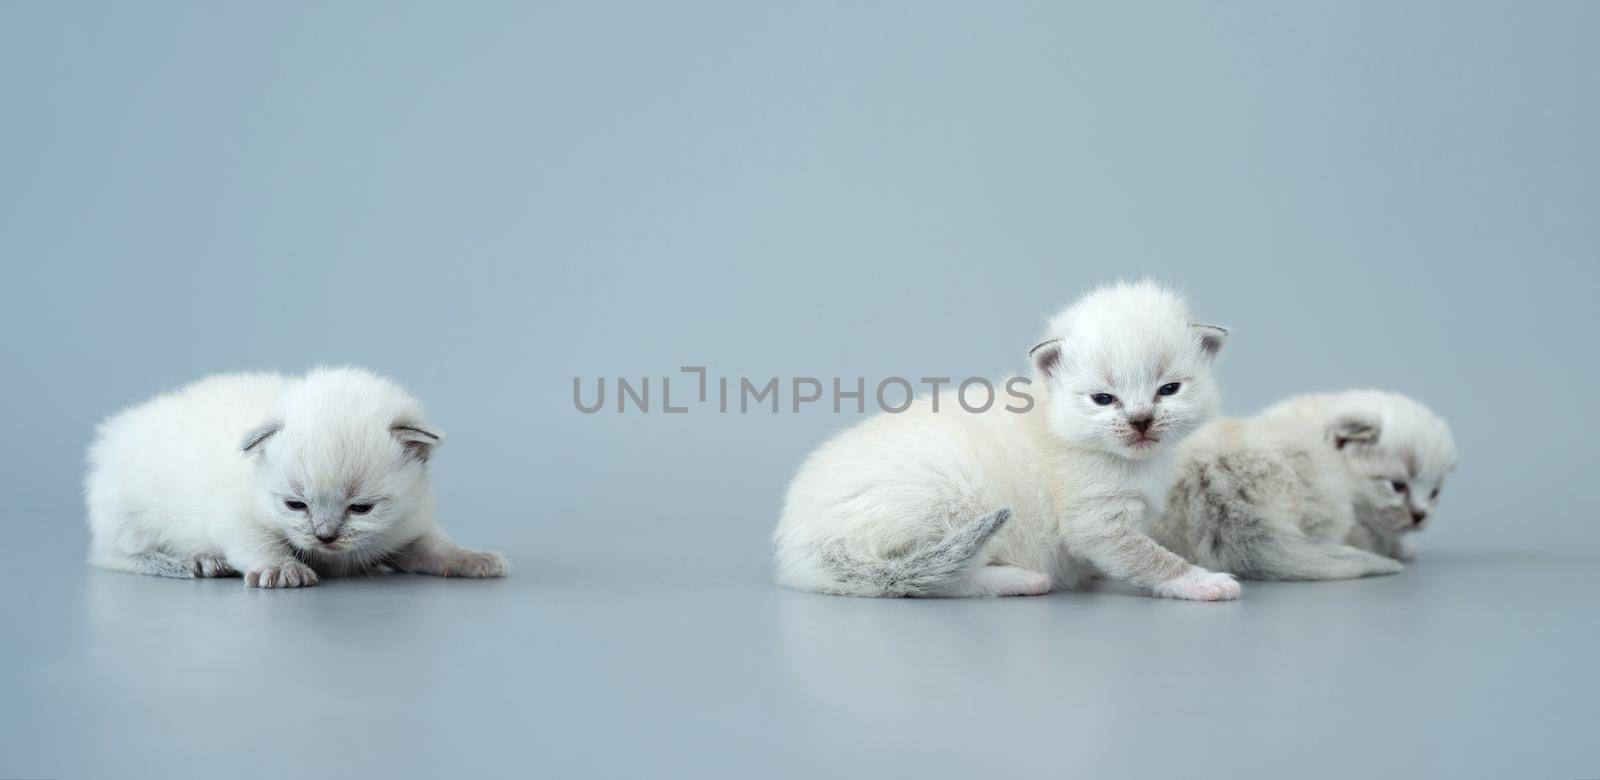 Three fluffy ragdoll kittens sitting together and looking at the camera isolated on light blue background with copyspace. Studio portrait of small cute breed cats